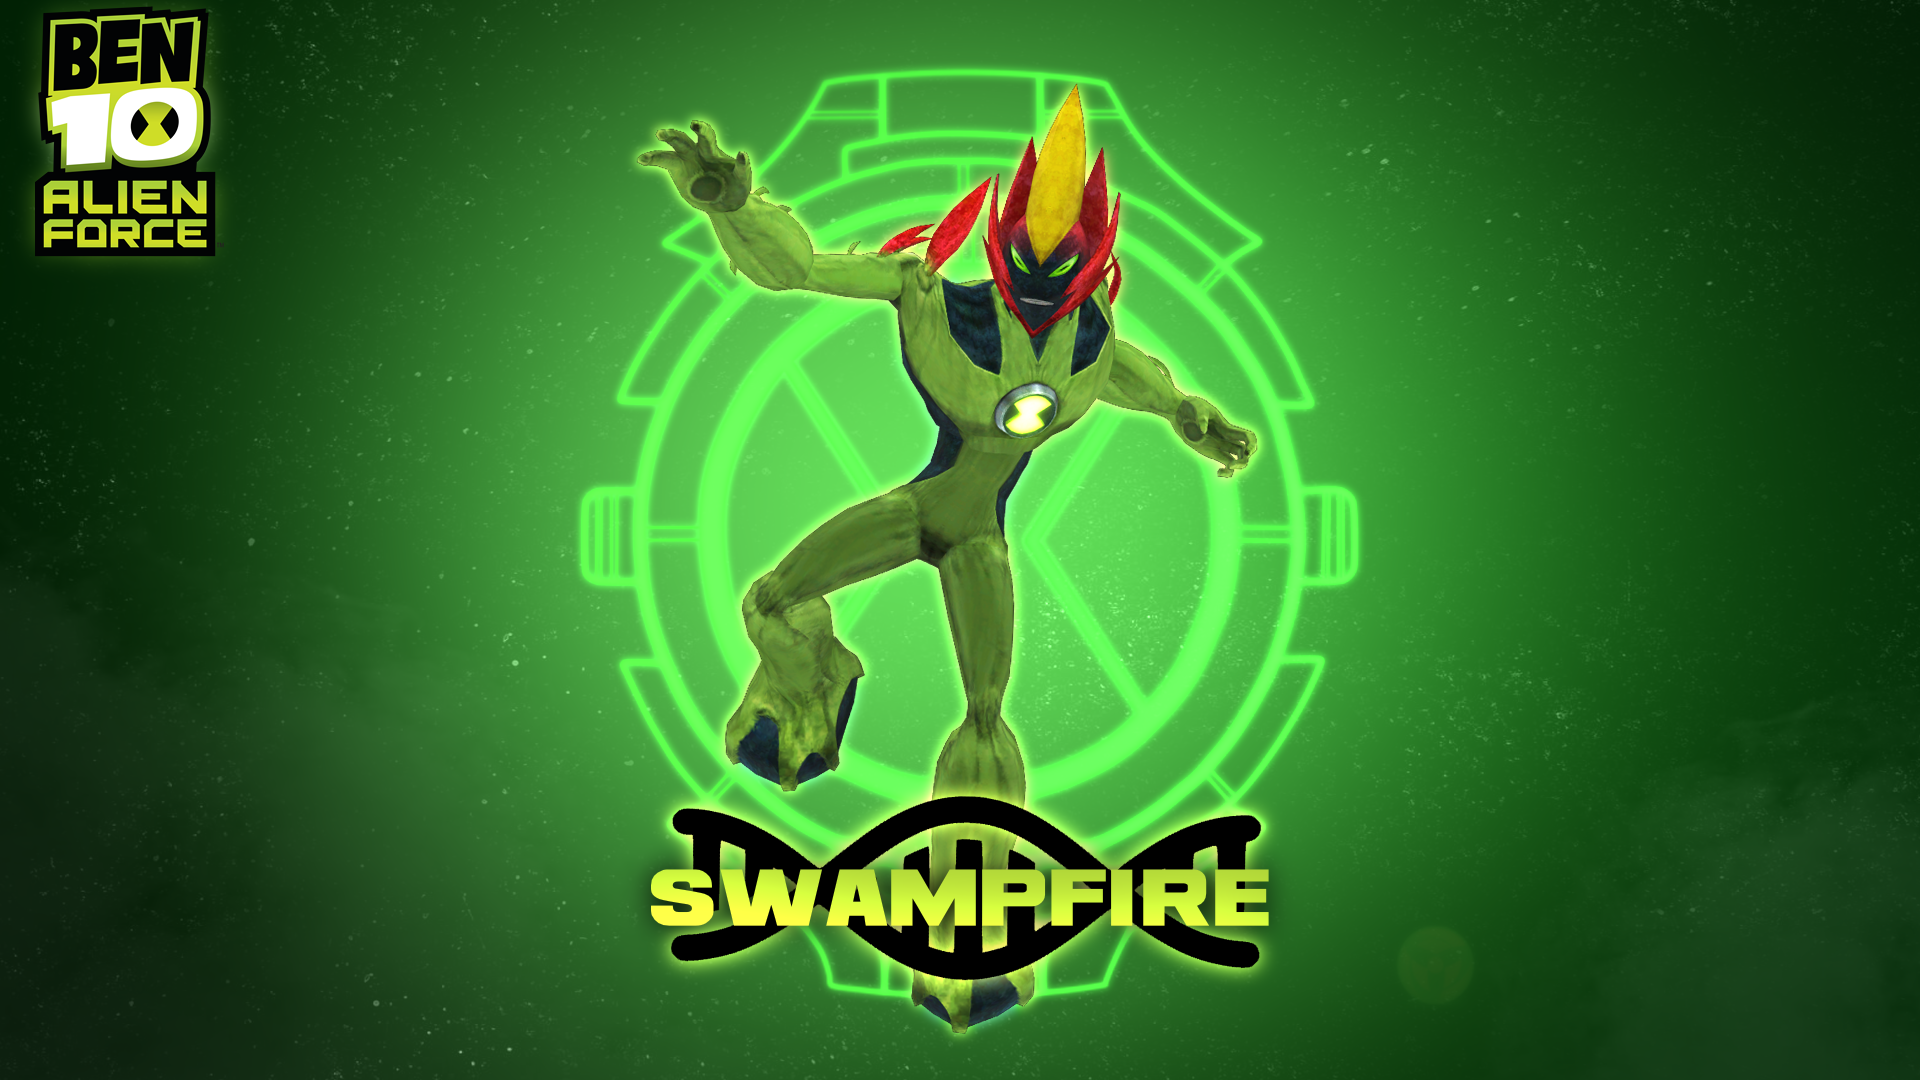 MMD Swampfire DL by lupalah 1920x1080